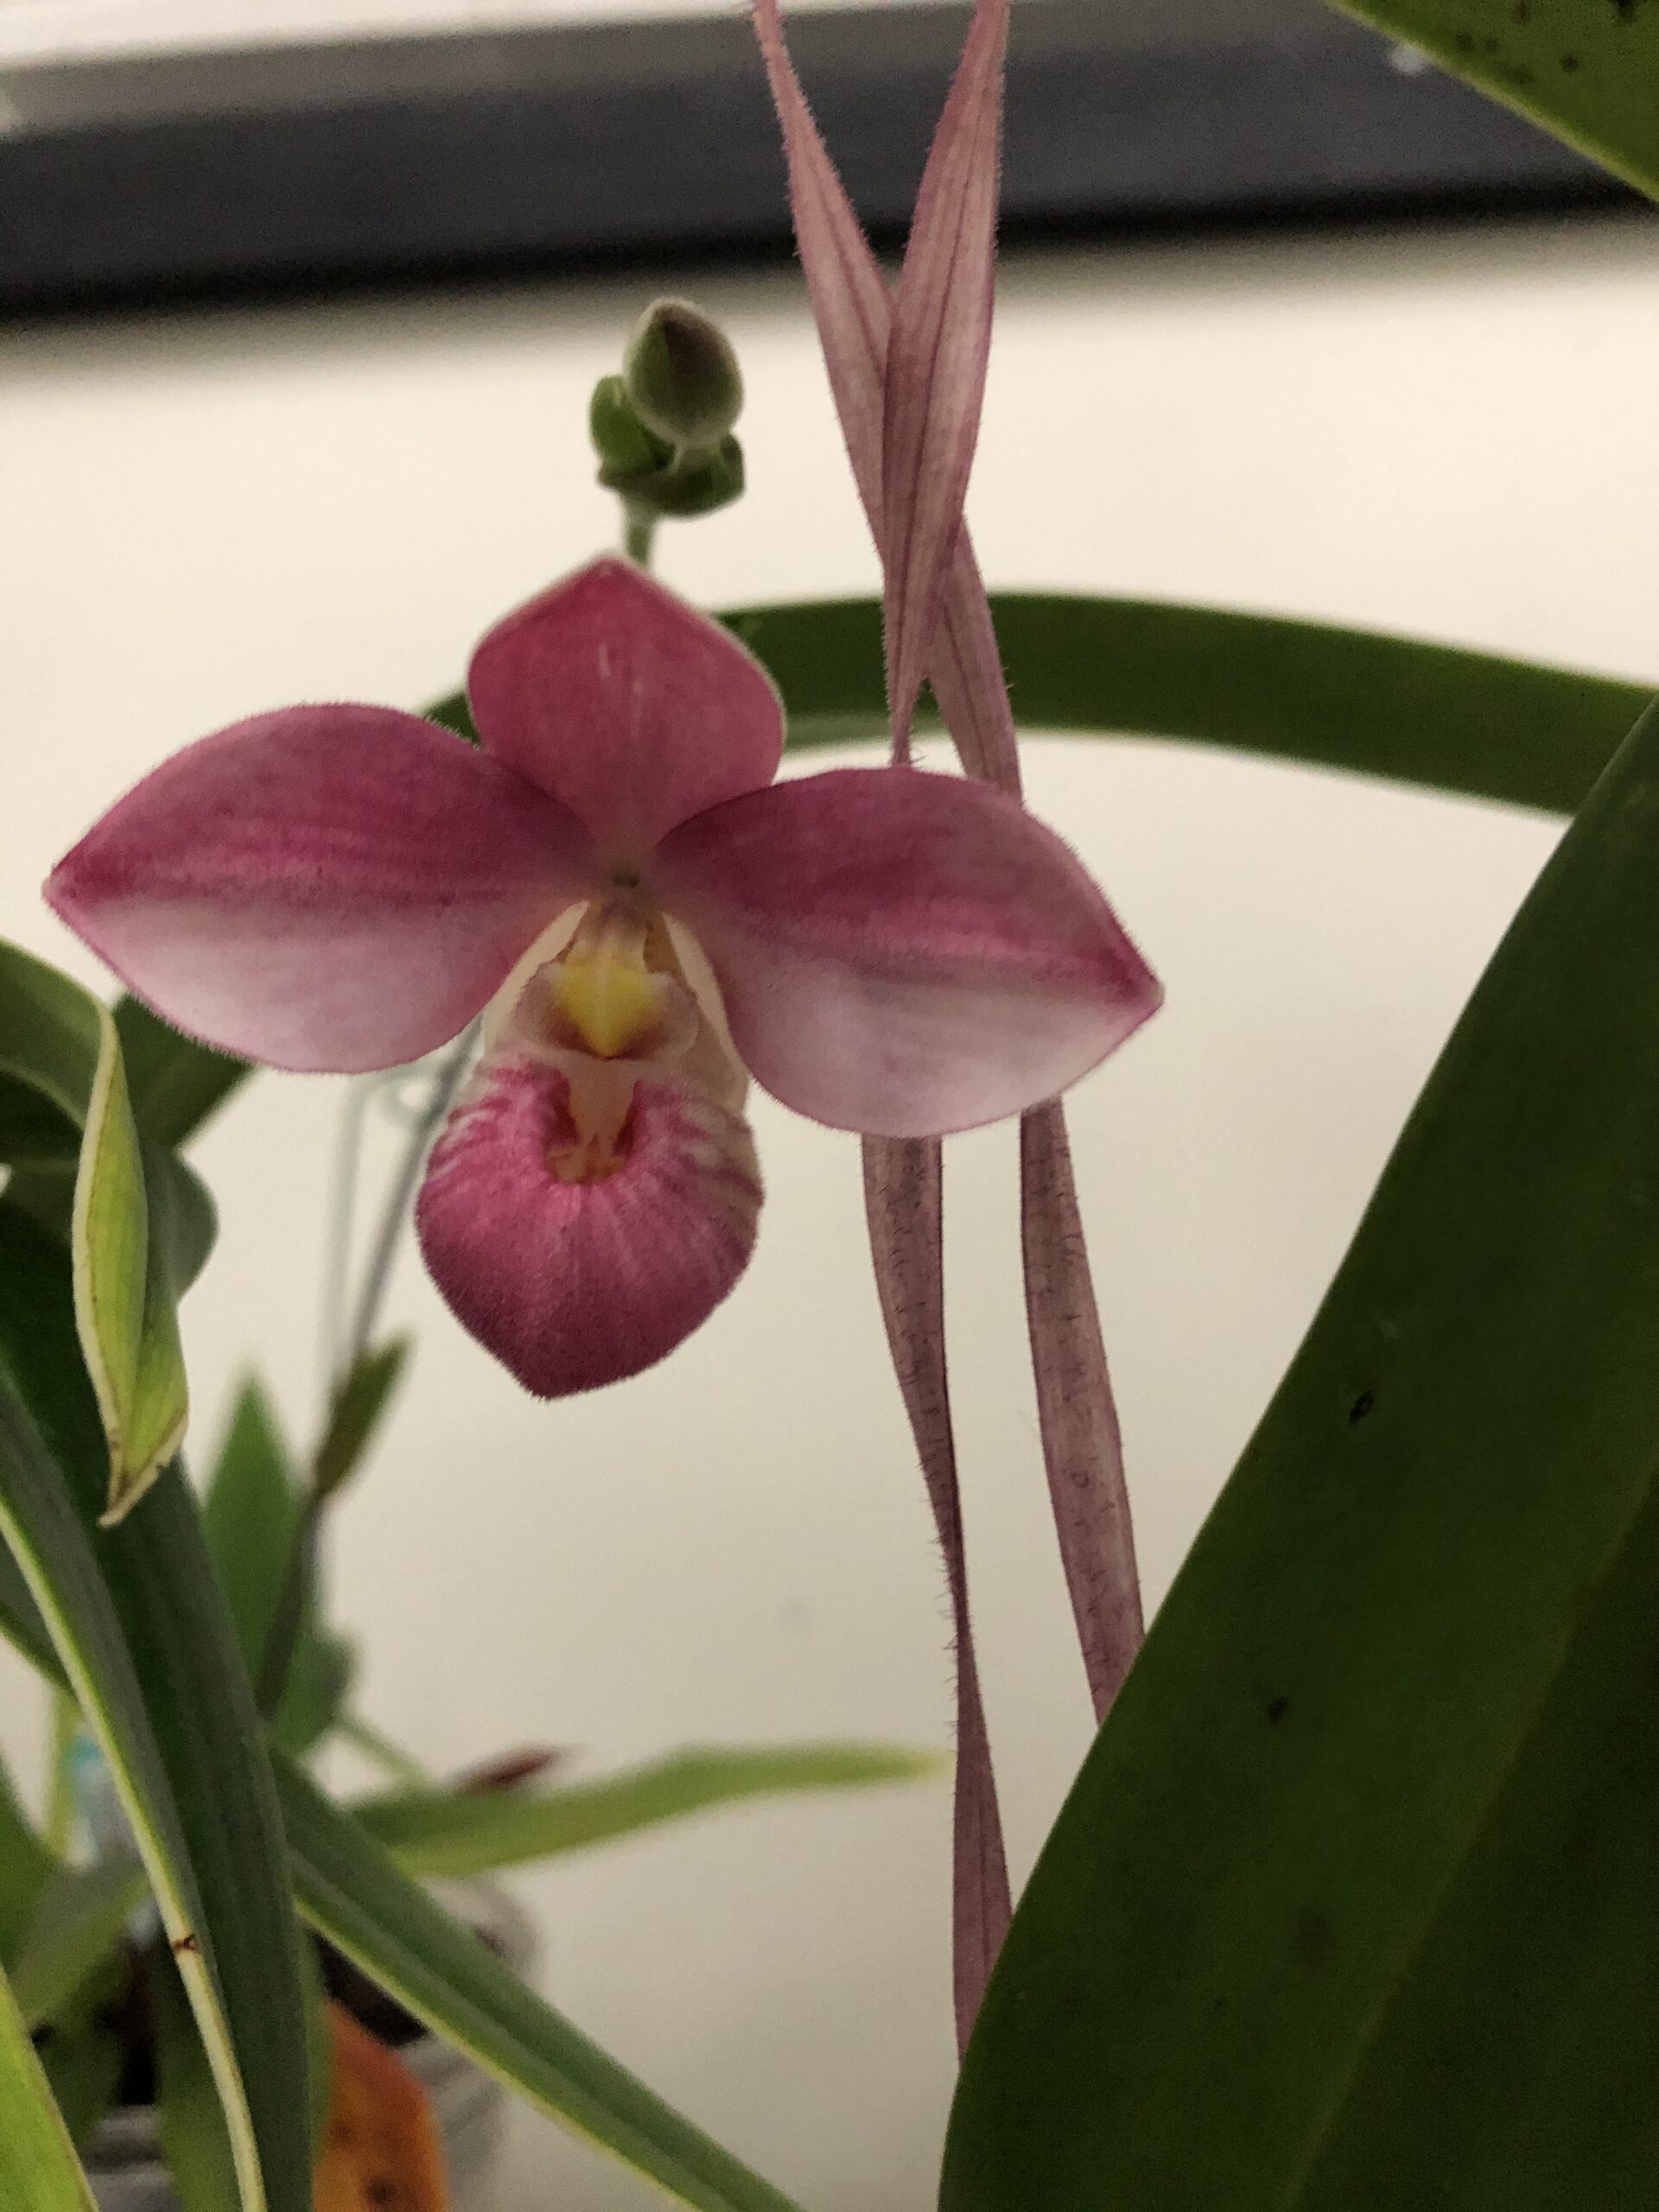 Phragmipedium Hannah-Popow type (no name). A single pink flower. The pouch is a dark pink color. The two petals are dark pink on the top half and a lighter pink on the bottom half. The dorsal sepal is also pink.